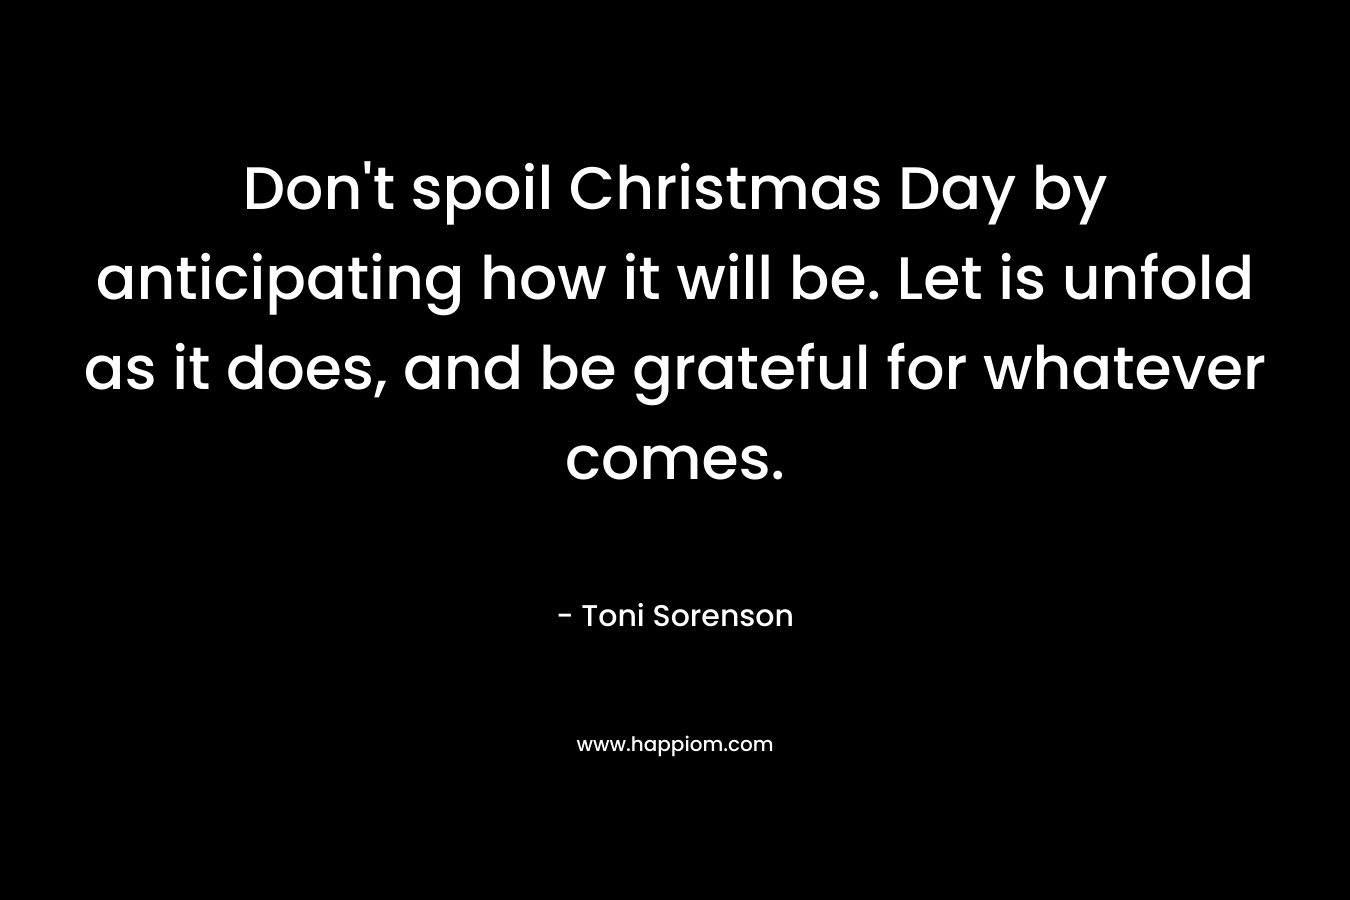 Don't spoil Christmas Day by anticipating how it will be. Let is unfold as it does, and be grateful for whatever comes.